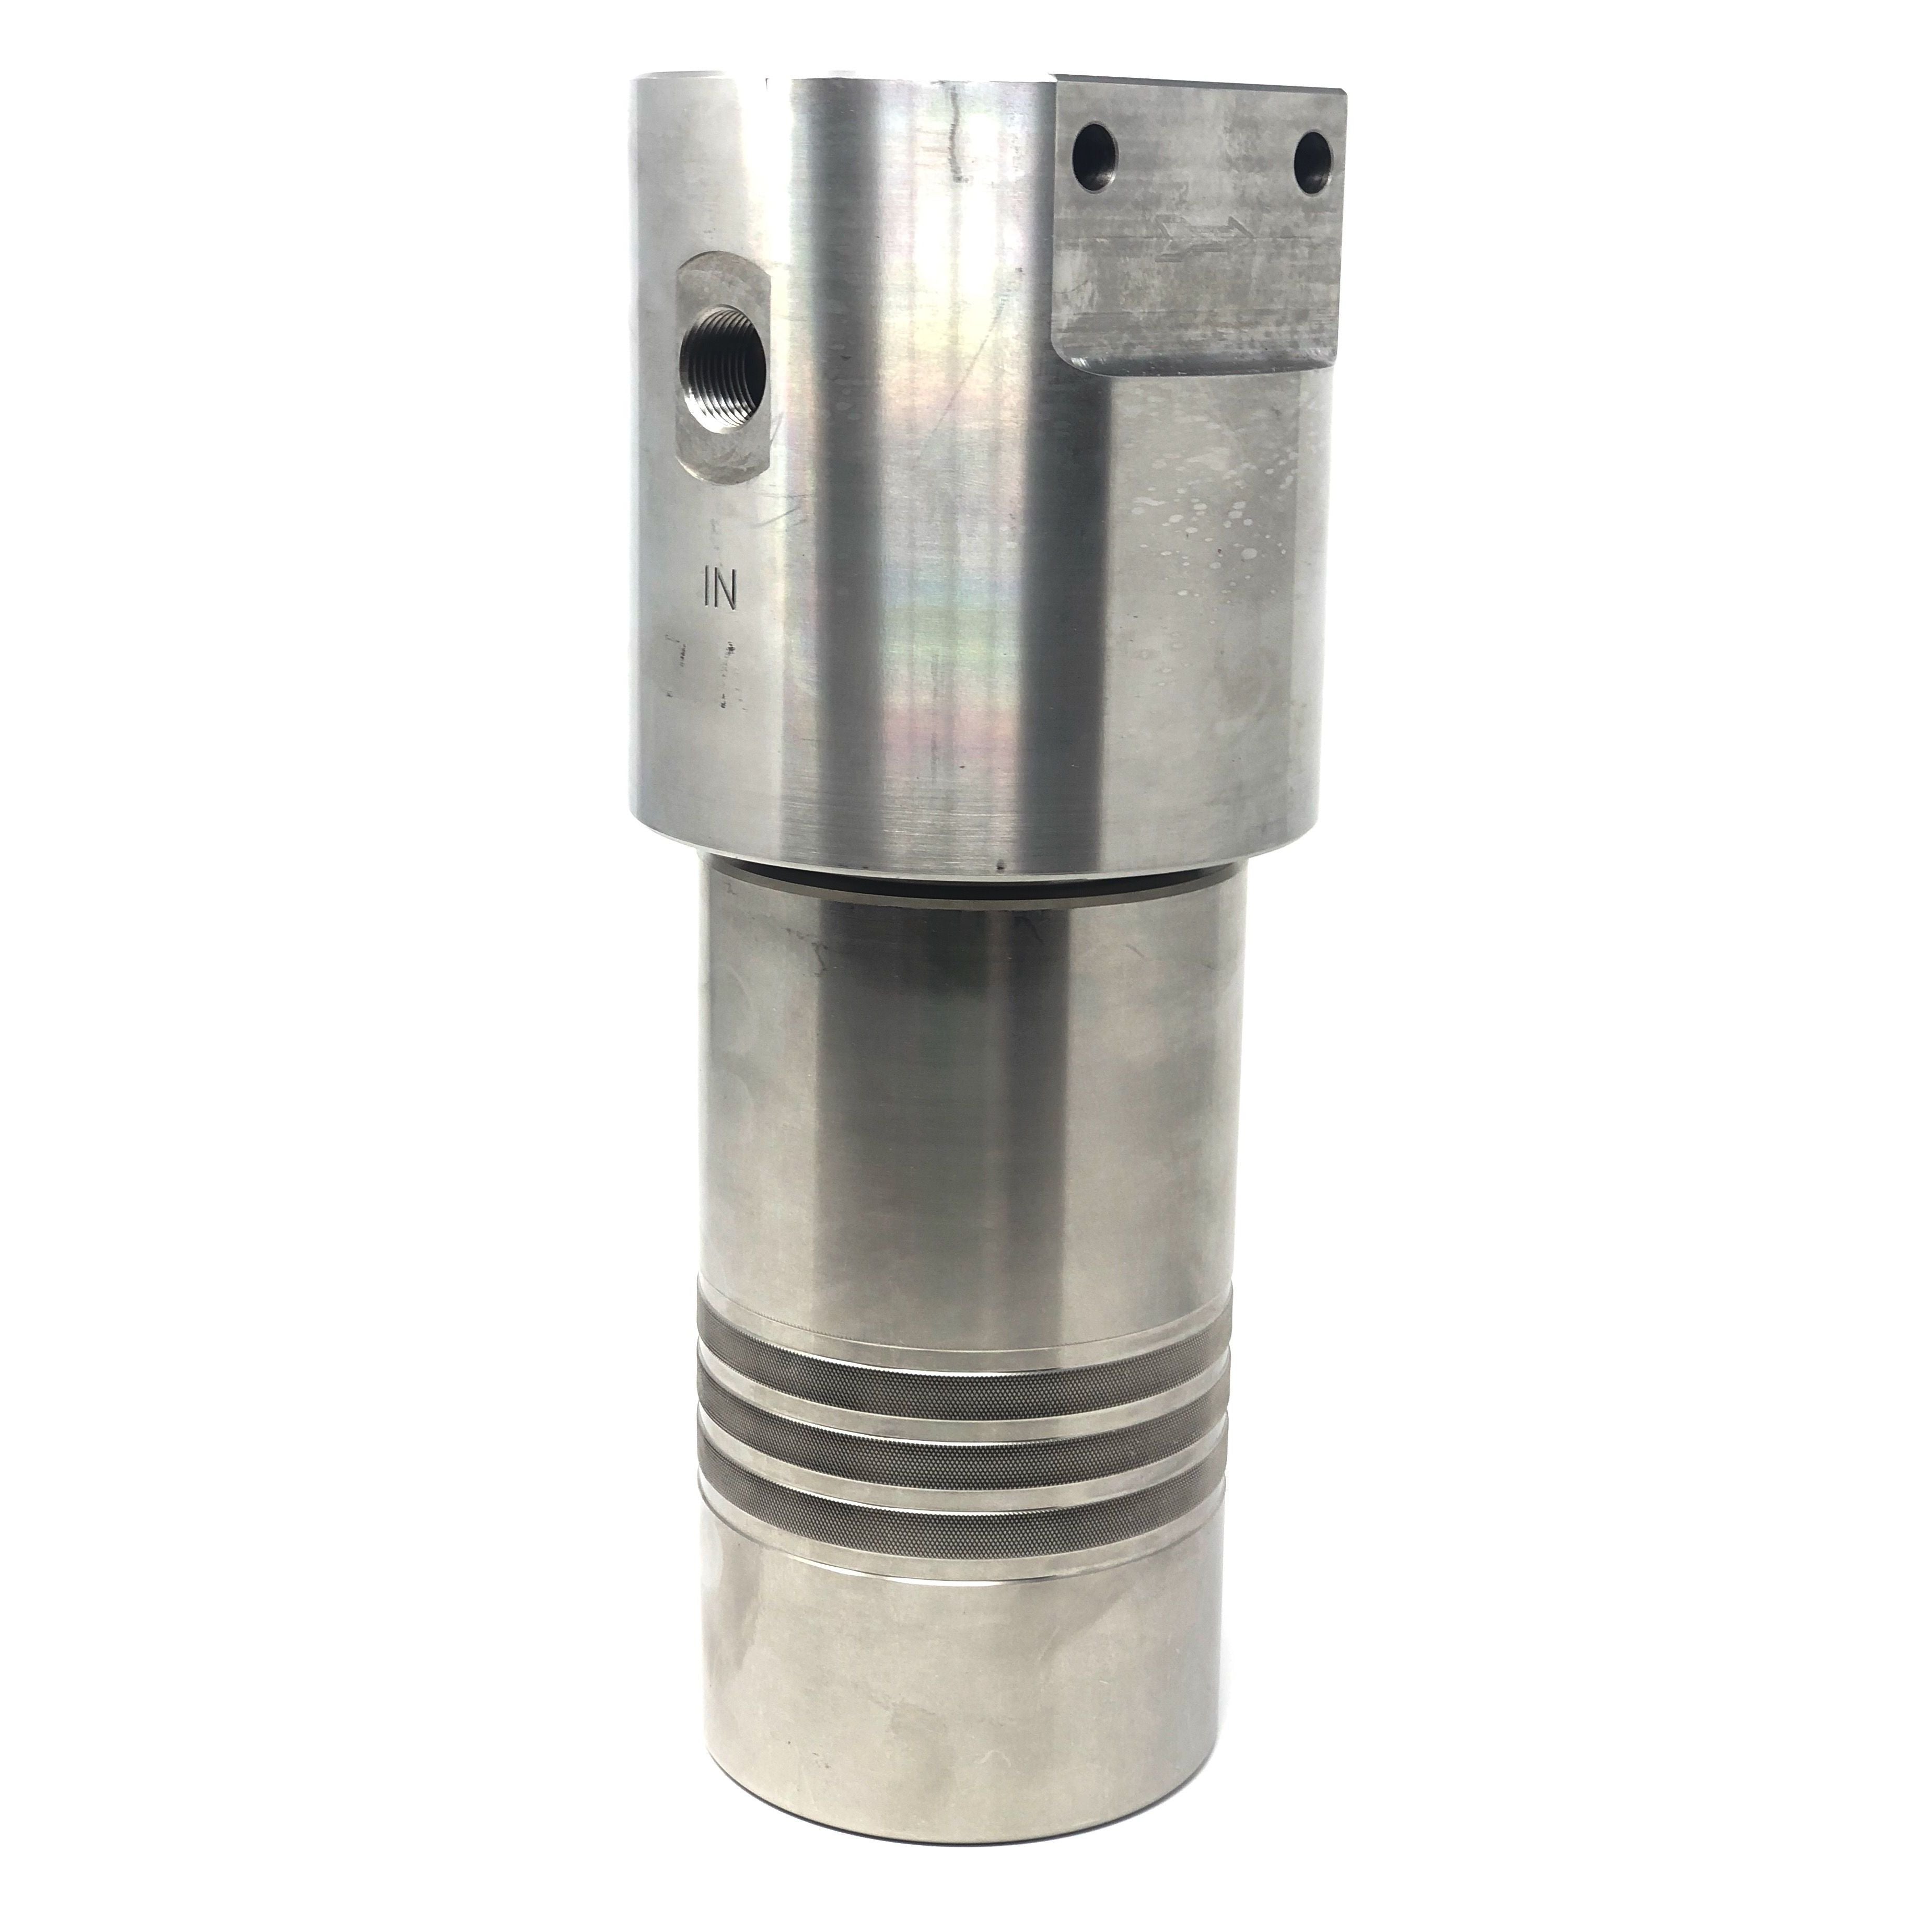 52S-246N-10SEN : Chase Ultra High Pressure Inline Filter, 10000psi, 3/8" NPT, 10 Micron, With Visual Indicator, No Bypass